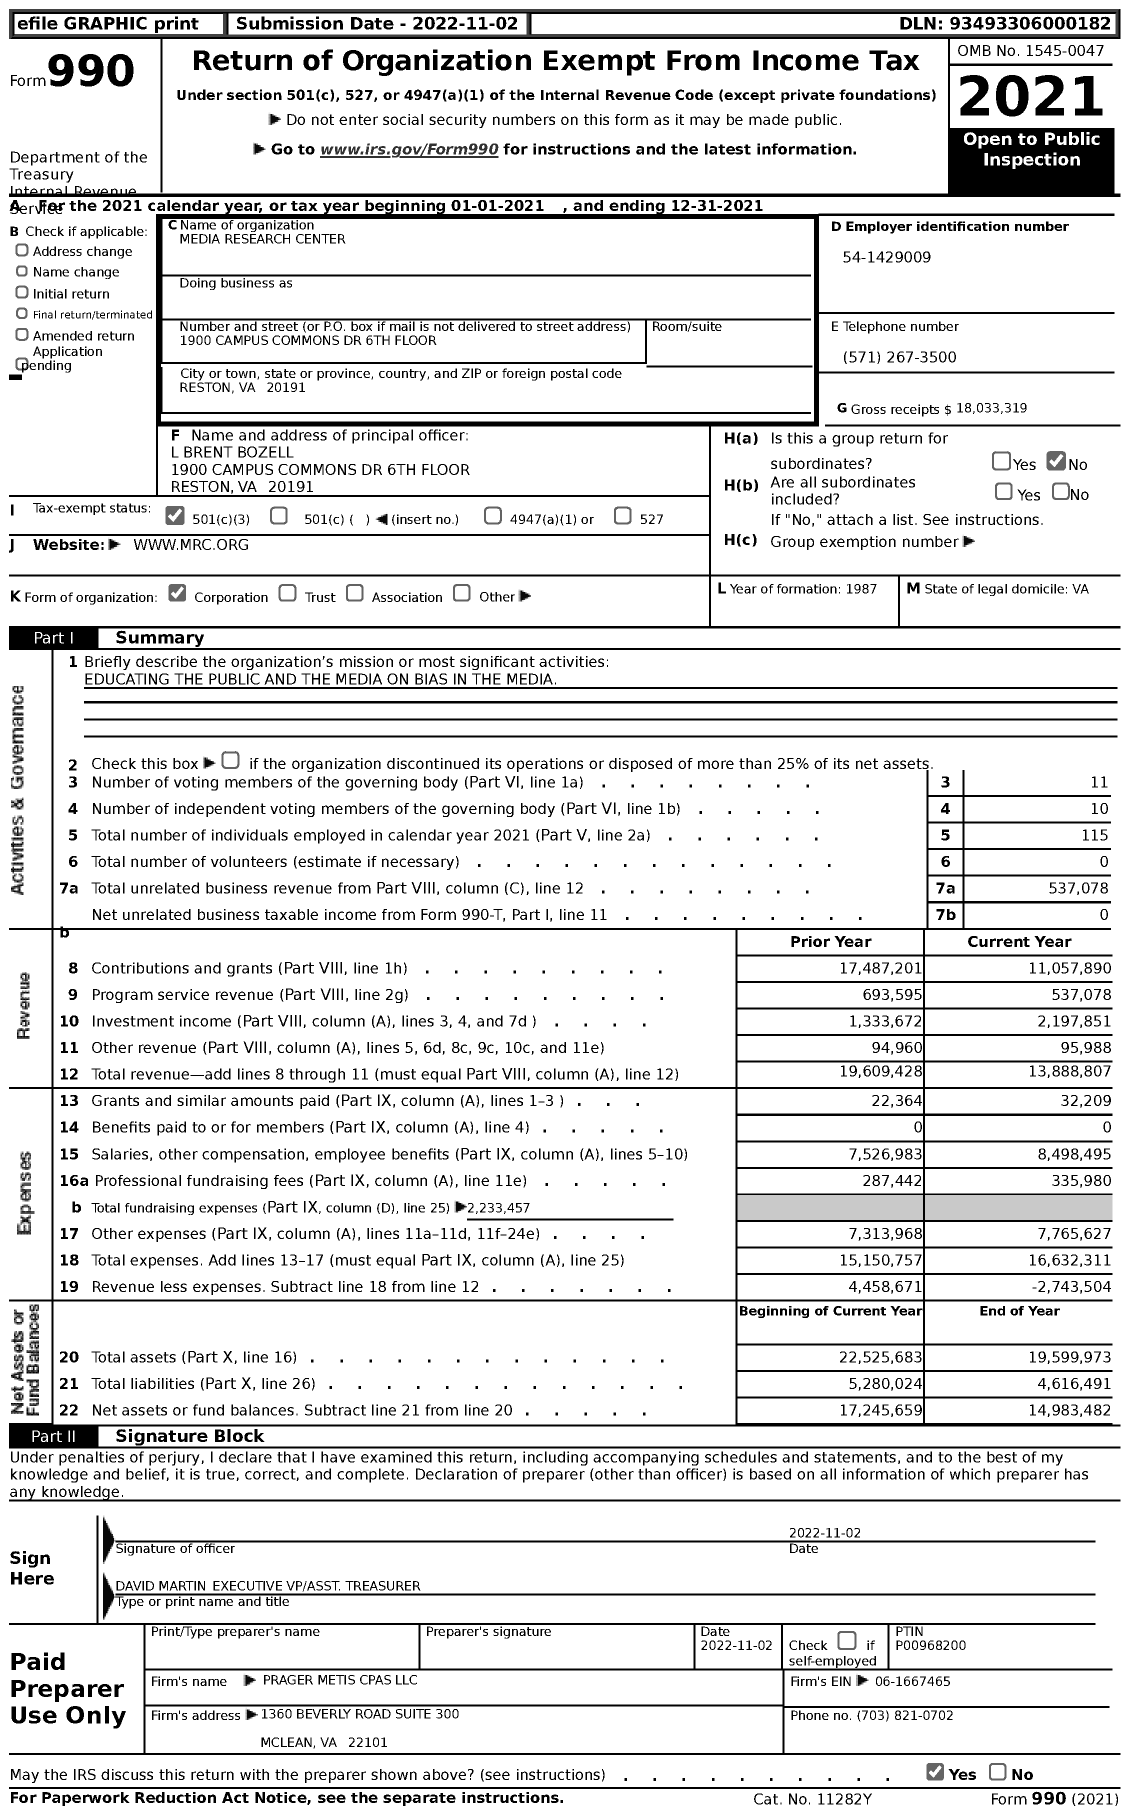 Image of first page of 2021 Form 990 for Media Research Center (MRC)